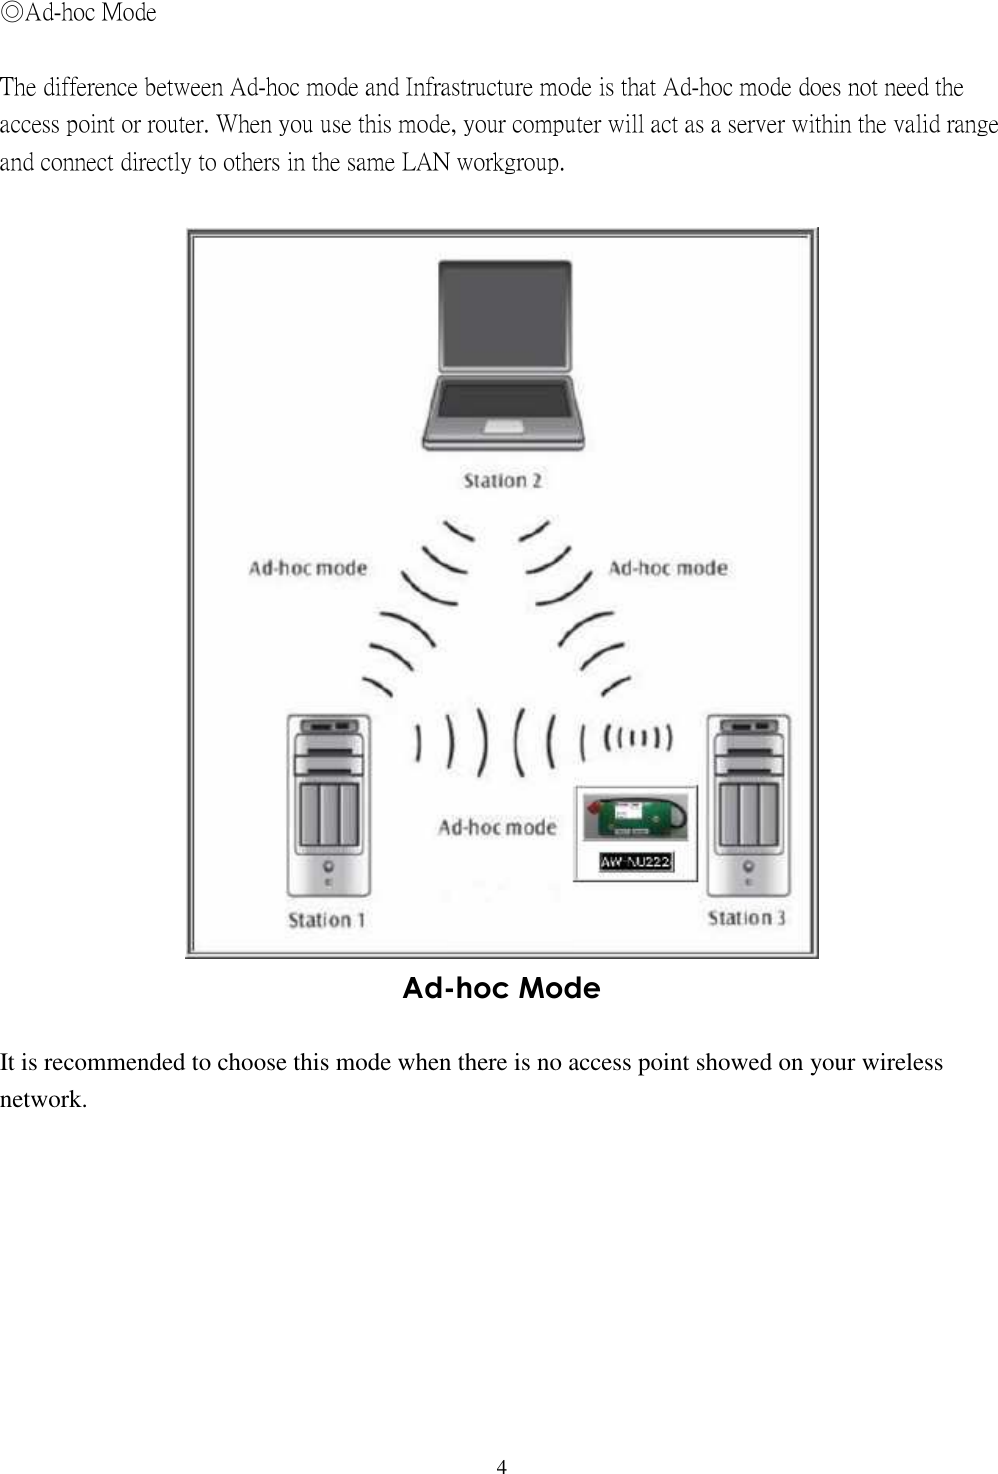   4   ◎Ad-hoc Mode  The difference between Ad-hoc mode and Infrastructure mode is that Ad-hoc mode does not need the access point or router. When you use this mode, your computer will act as a server within the valid range and connect directly to others in the same LAN workgroup.   Ad-hoc Mode  It is recommended to choose this mode when there is no access point showed on your wireless network.          